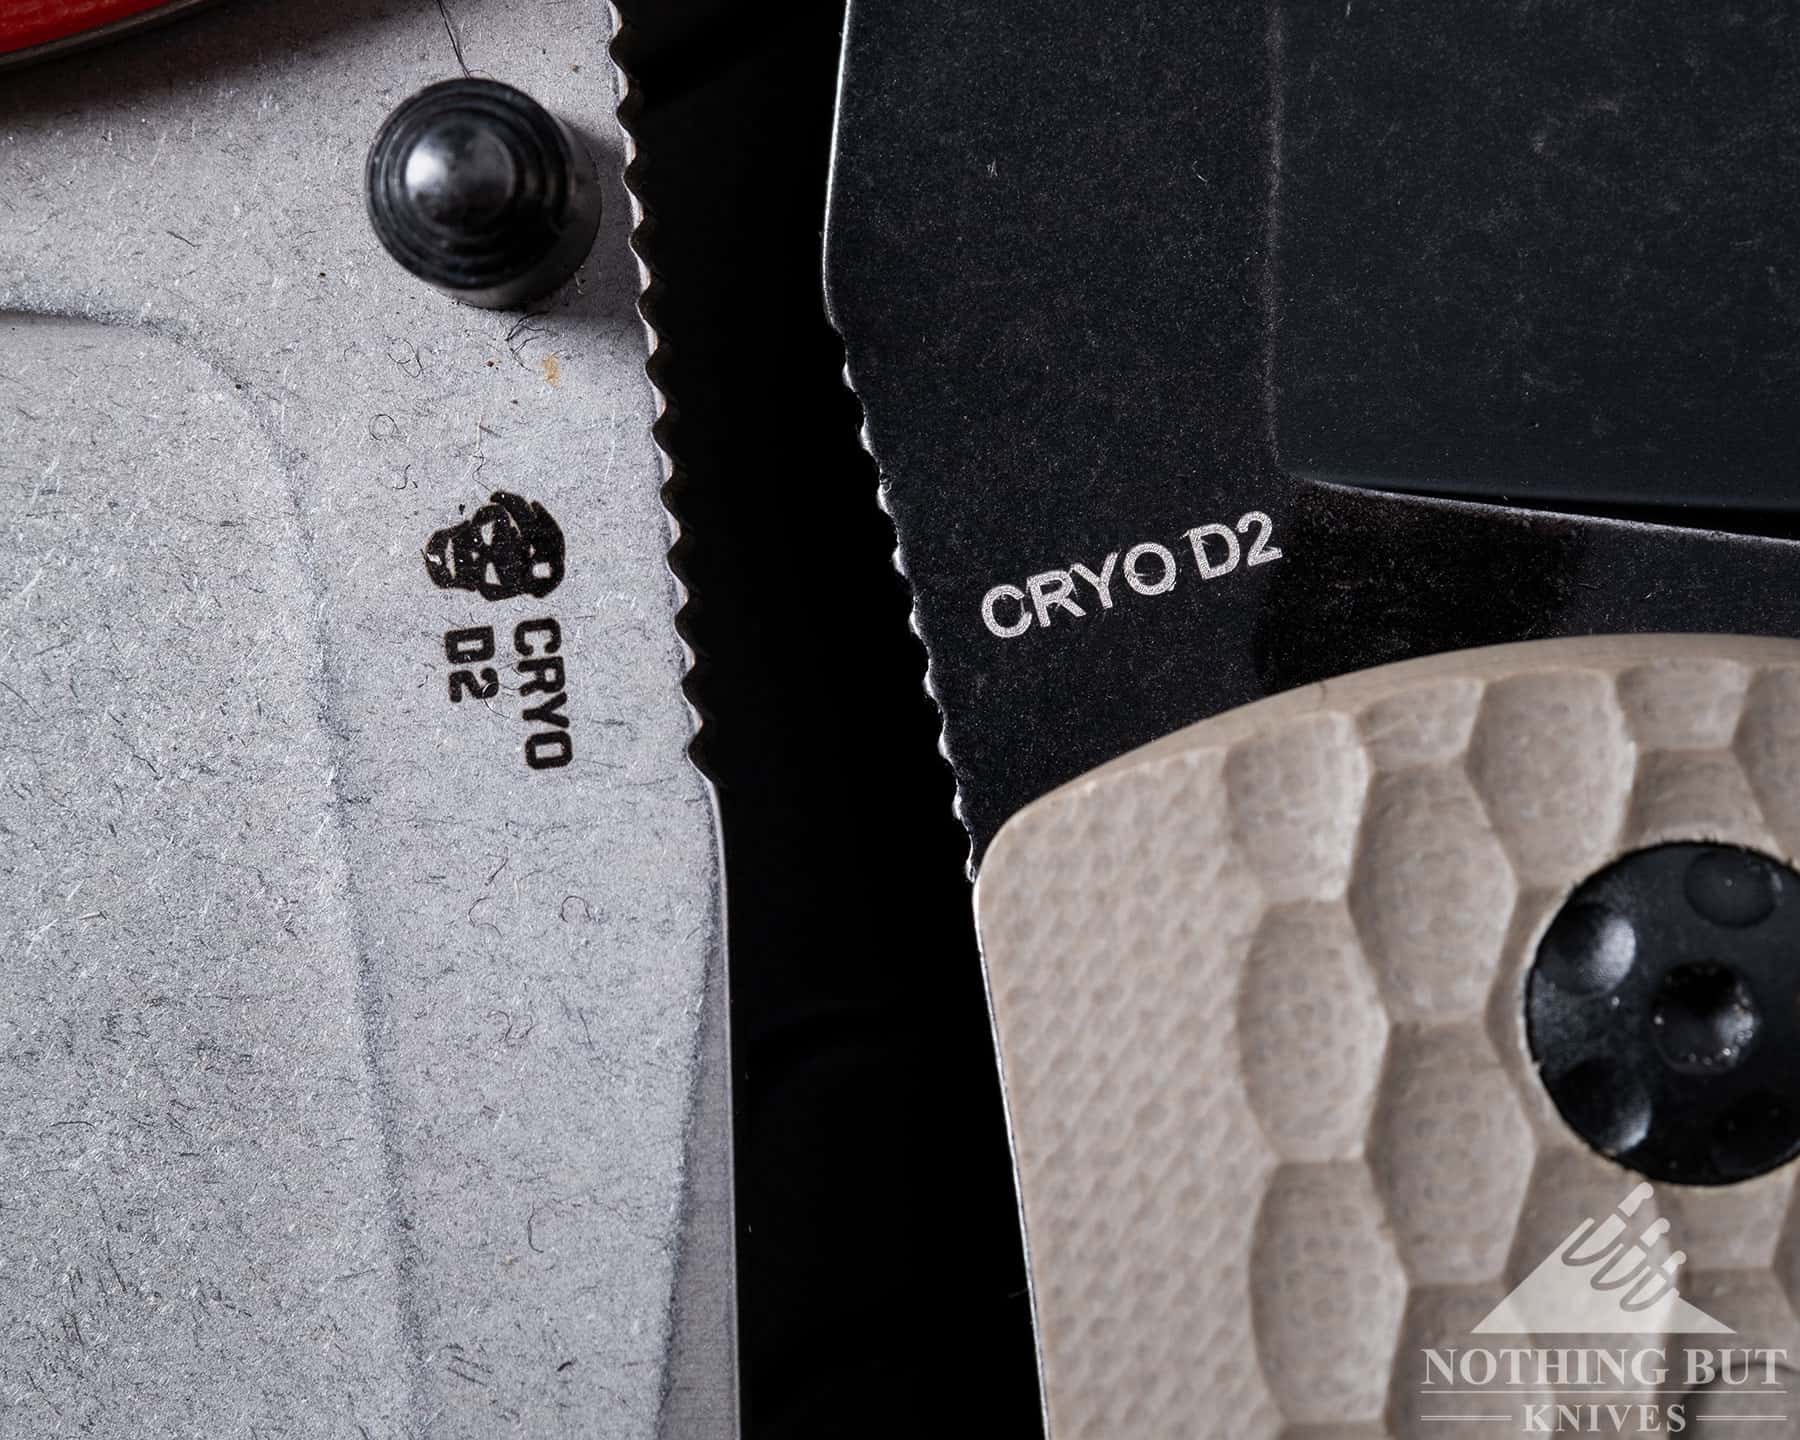 A macro image showing the steel stamps on the blades of two pocket knives.